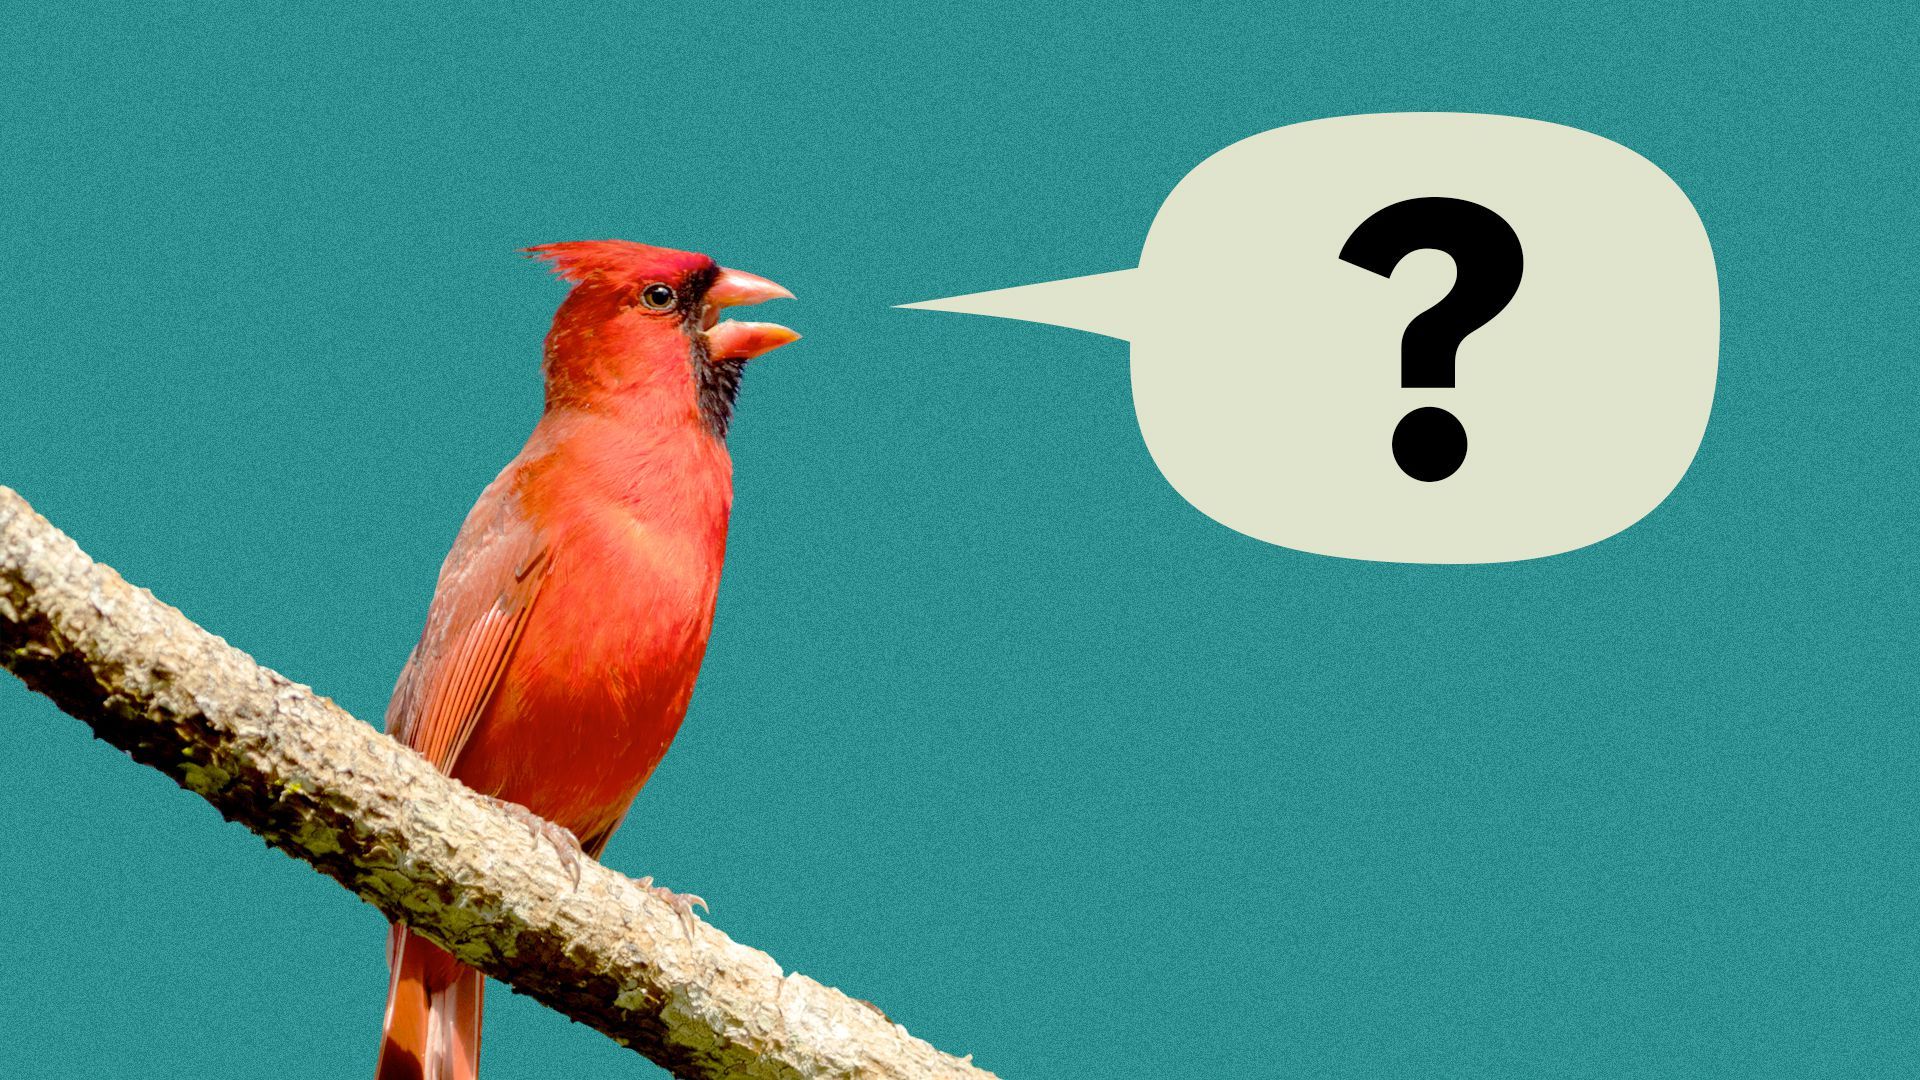 Illustration of a cardinal sitting on a branch with a word balloon with a question mark in it coming out of its mouth.